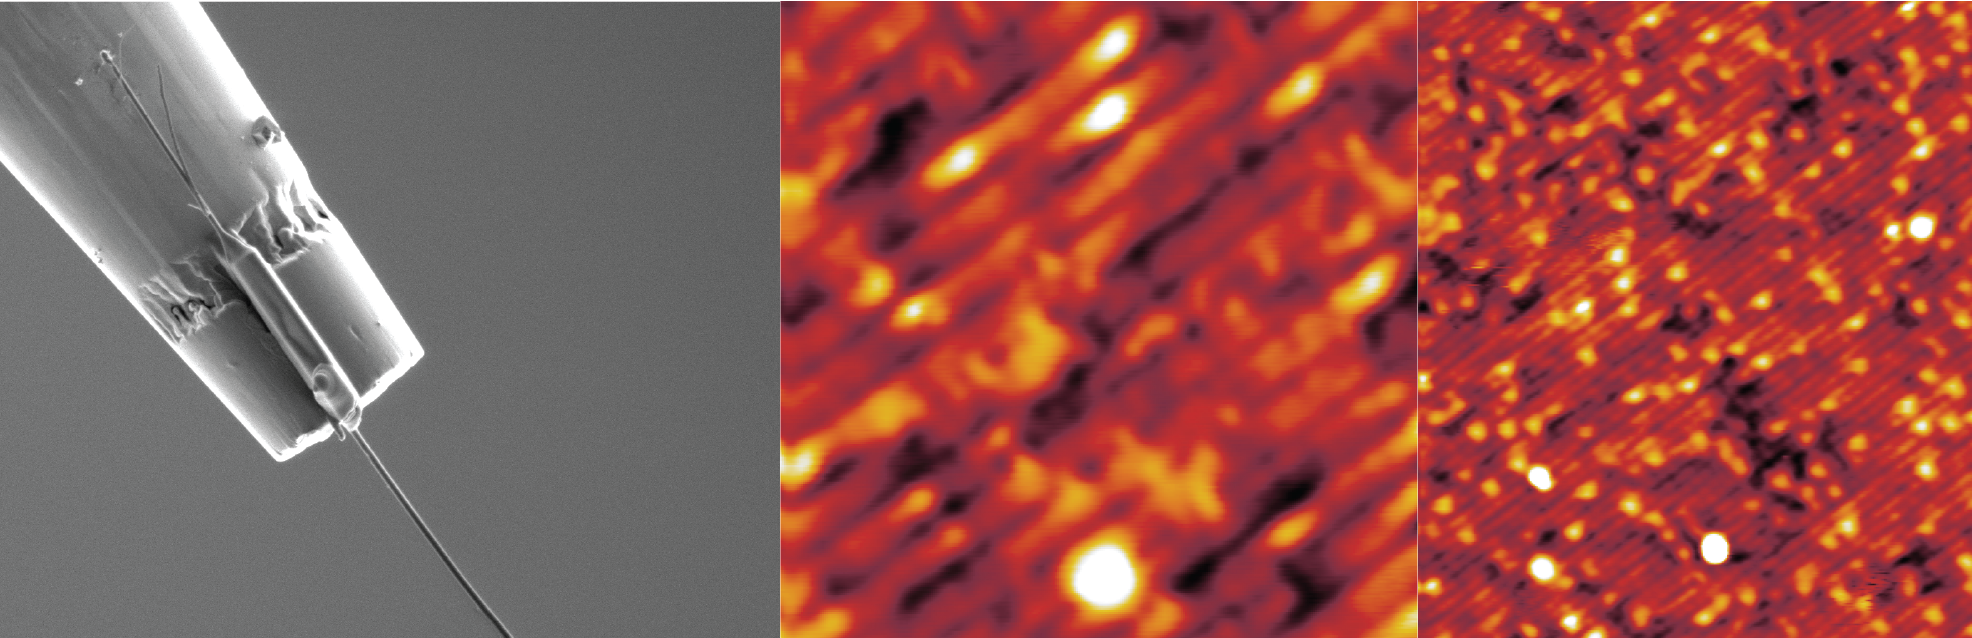 Scanning electron microscope image (left) of samarium hexaboride nanowire bonded to STM, with images from new study (middle and right). The middle image is a zoomed in view, showing light-dark-light striping that occurs in antiferromagnetic material. (Images provided by authors for use in this news story)